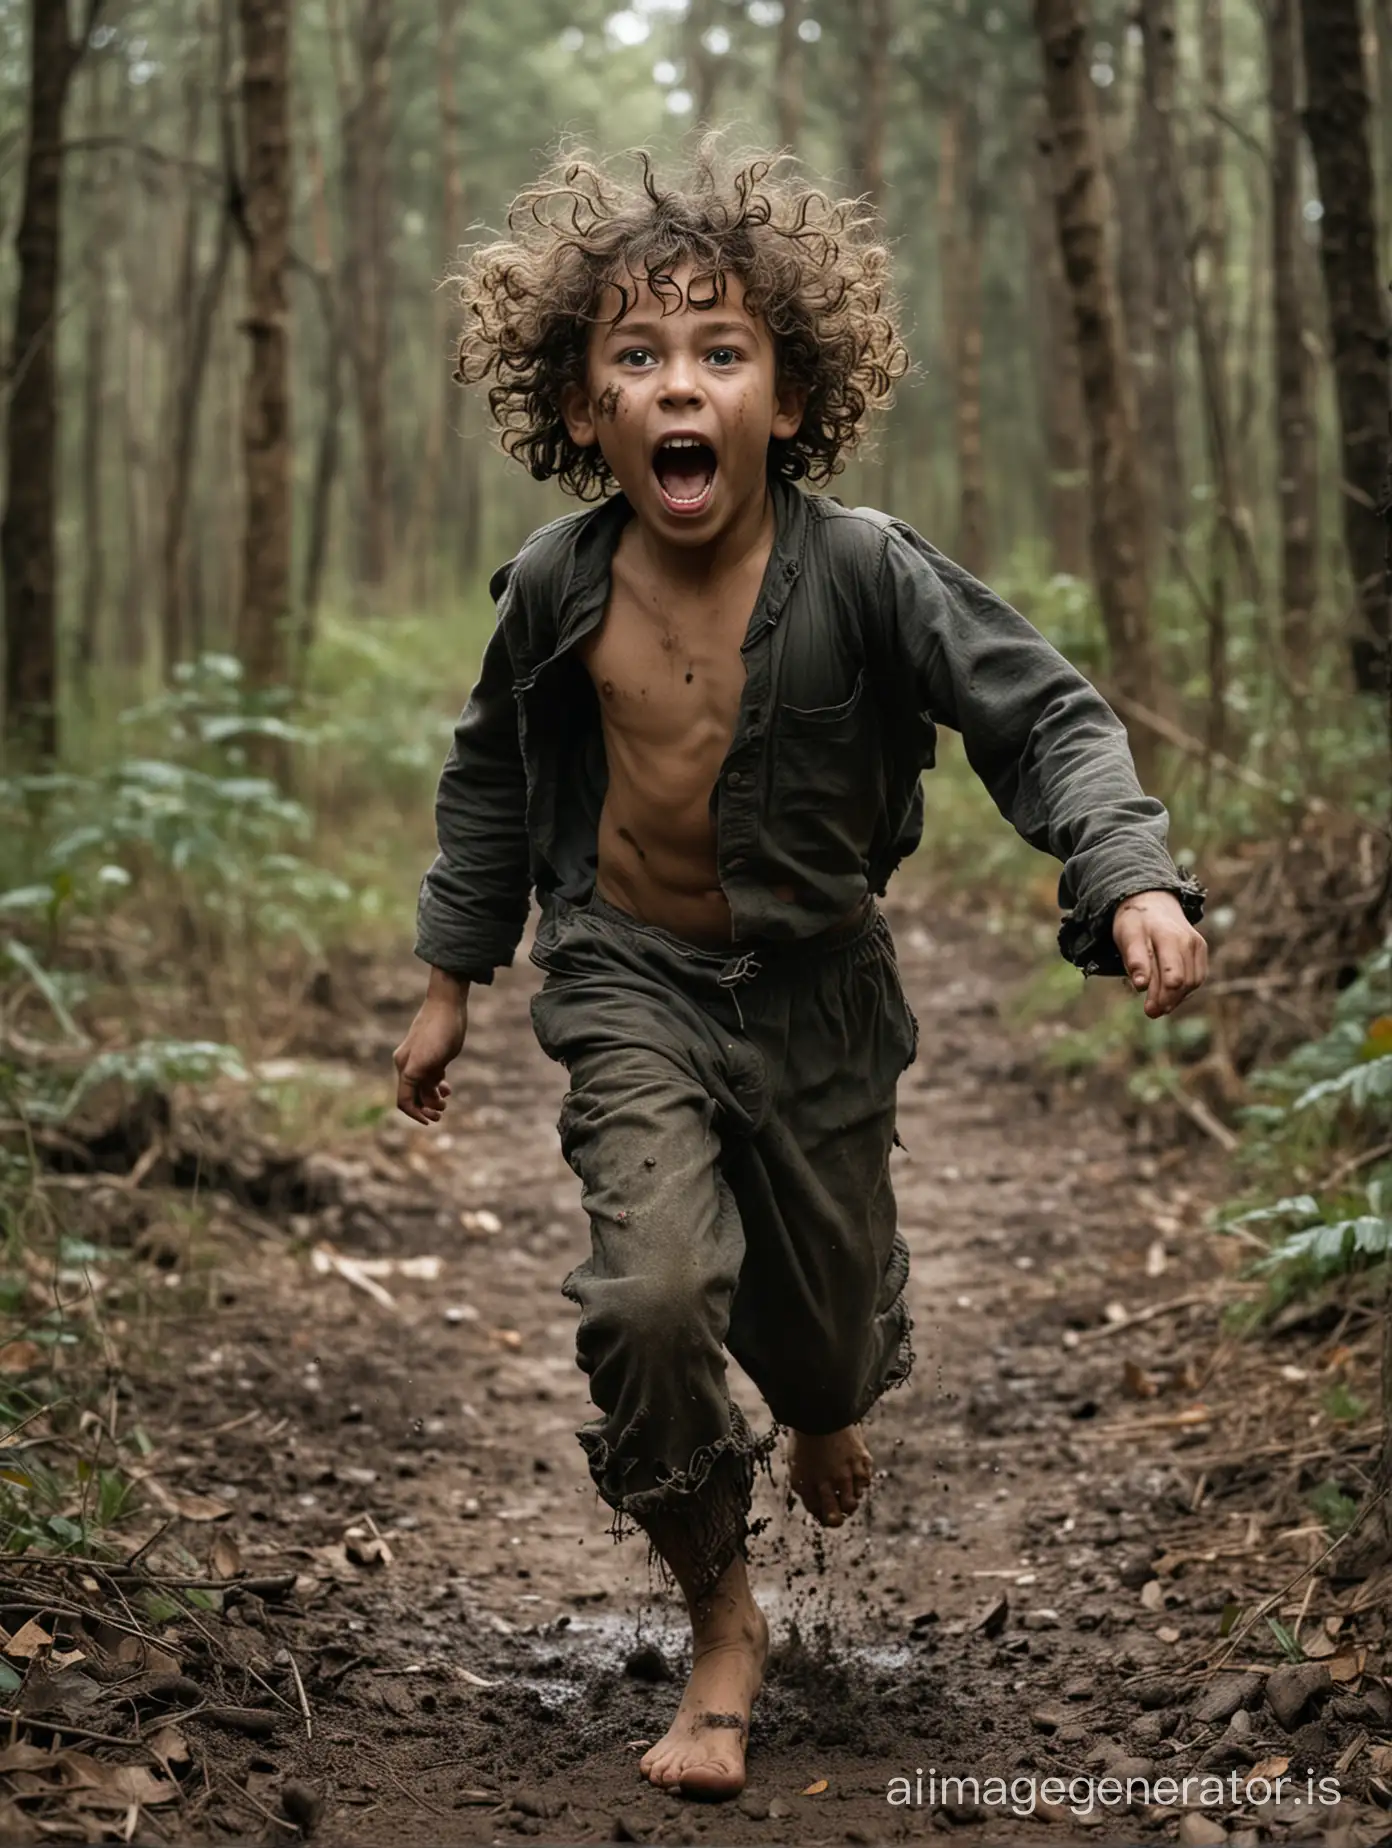 a kid, a wild child who screams while running very fast, living in the forest, the face very dirty, clothes torn, hair very long, black, curly, and dirty, in 1920, barefoot, he is frightening and threatening, very wild